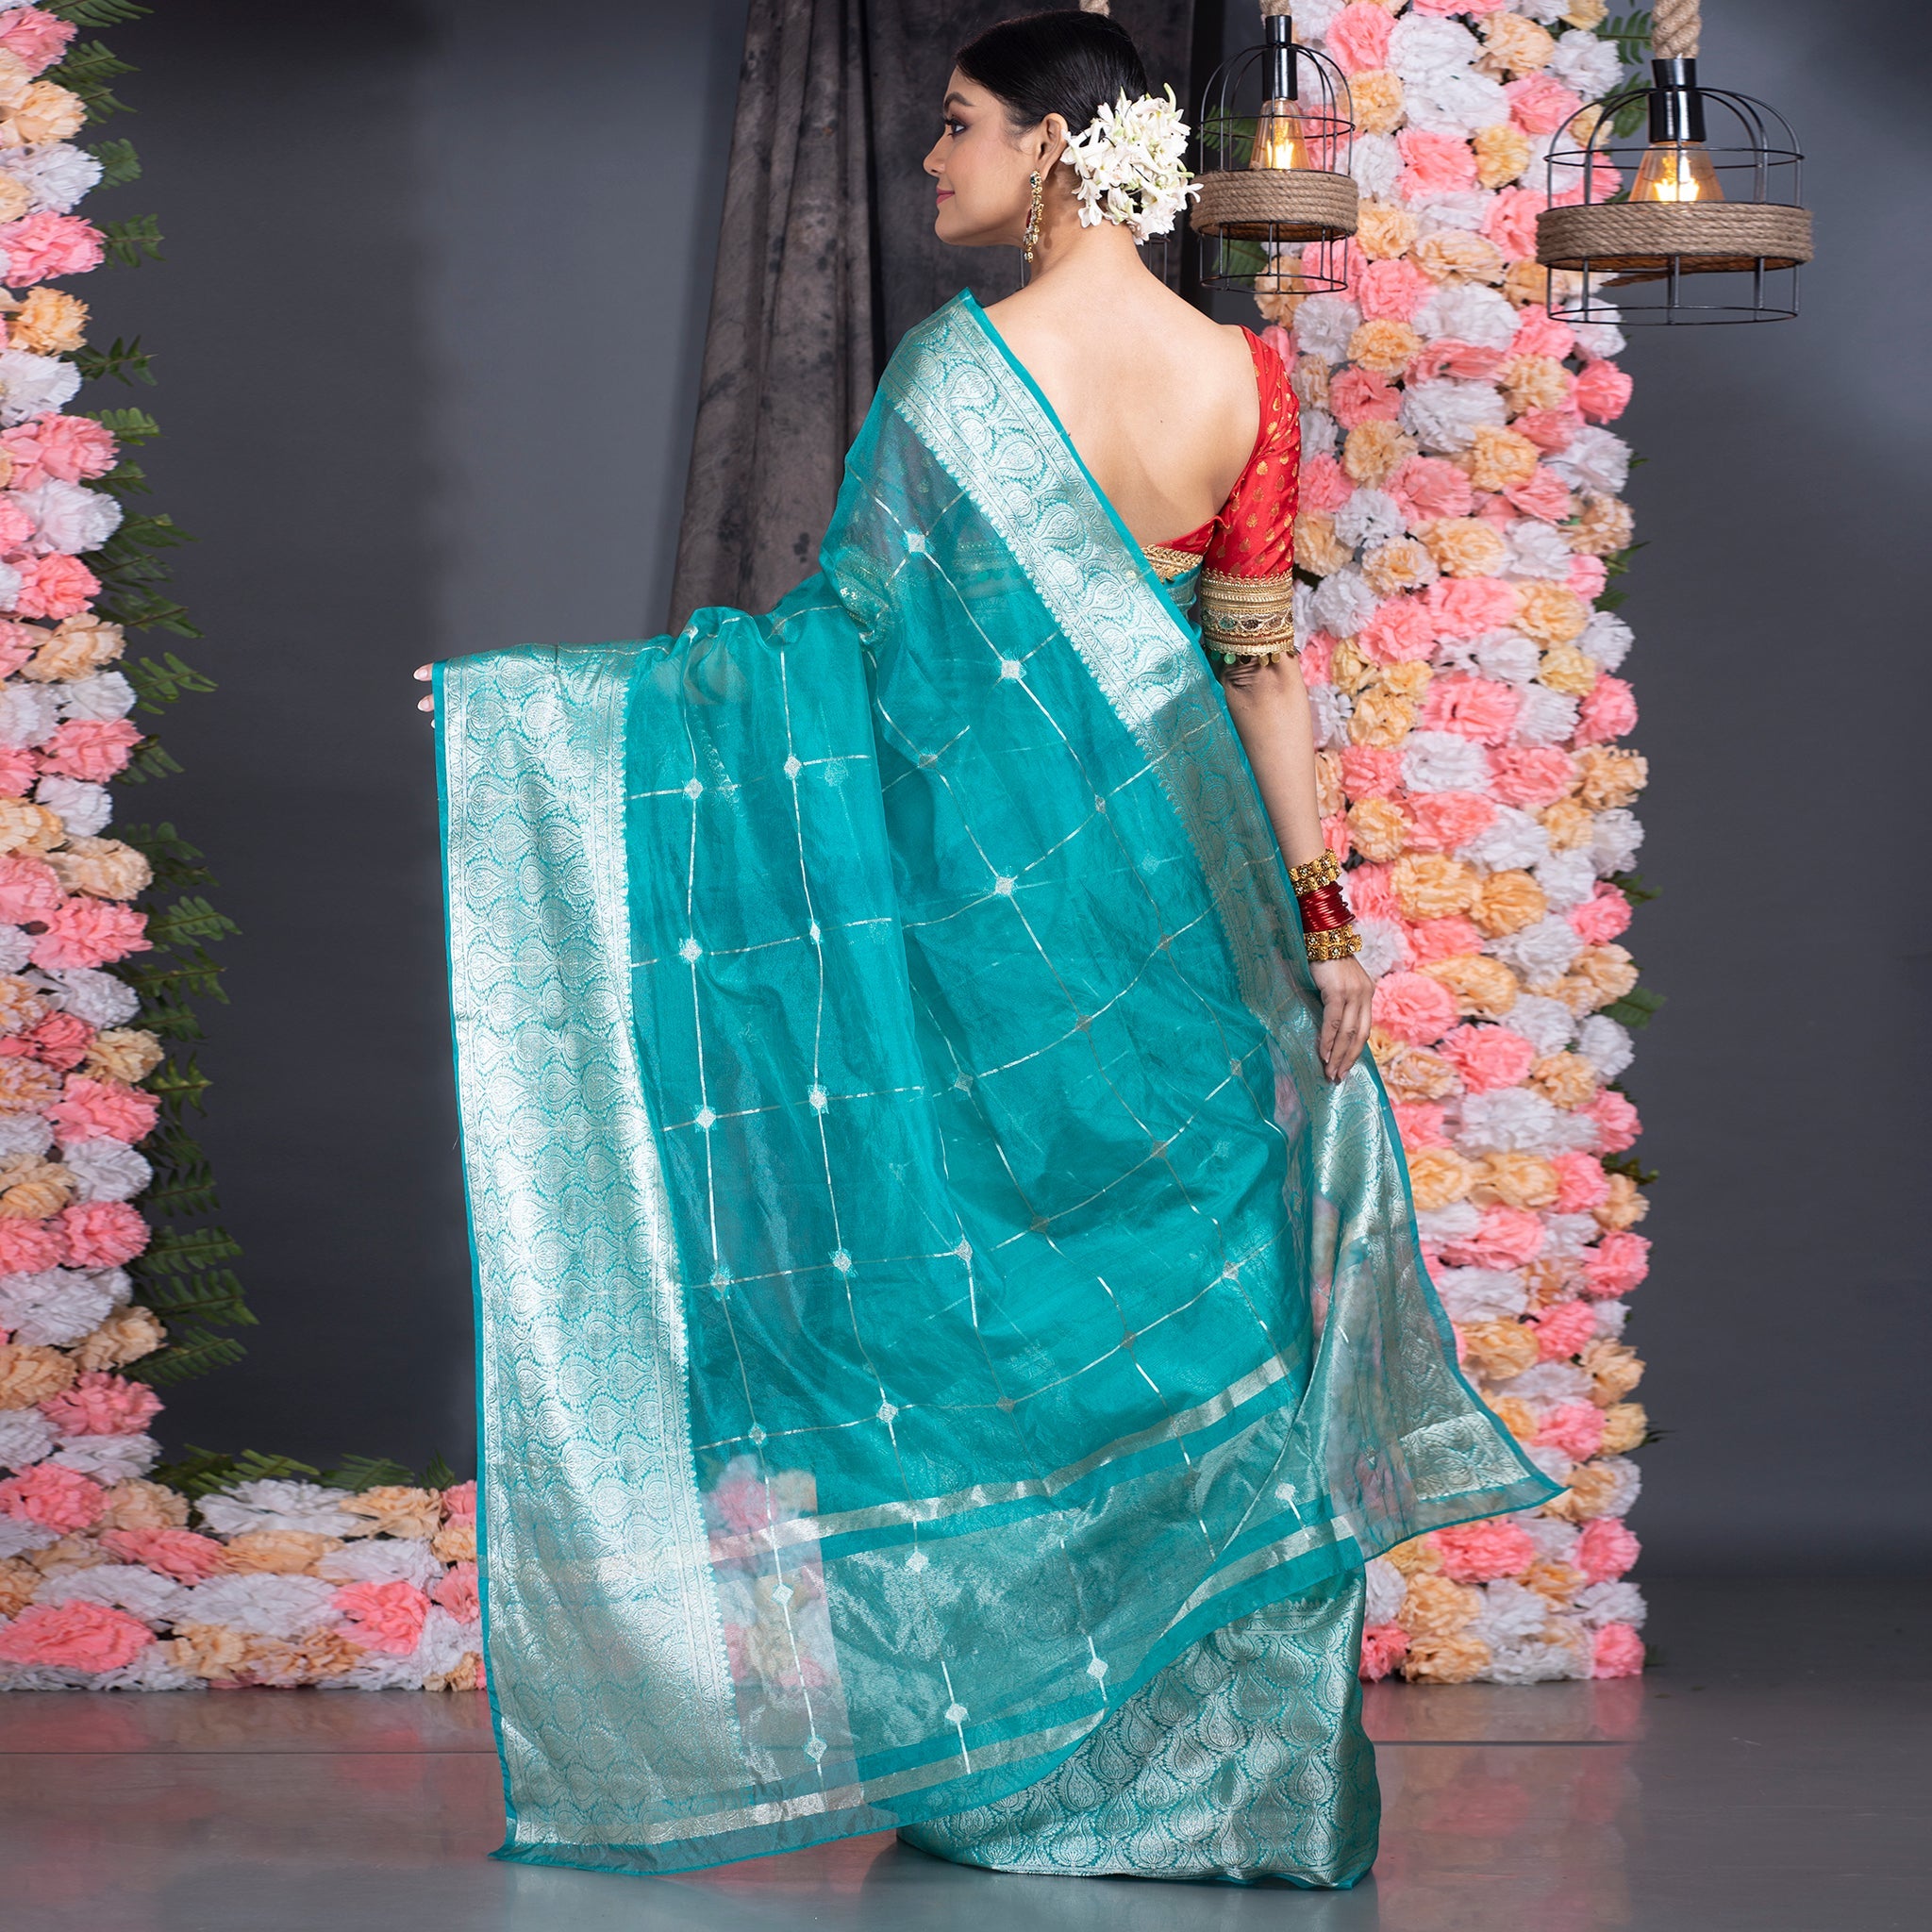 Women's Teal Organza Saree With Square Motifs And Ambi Jaal Border - Boveee